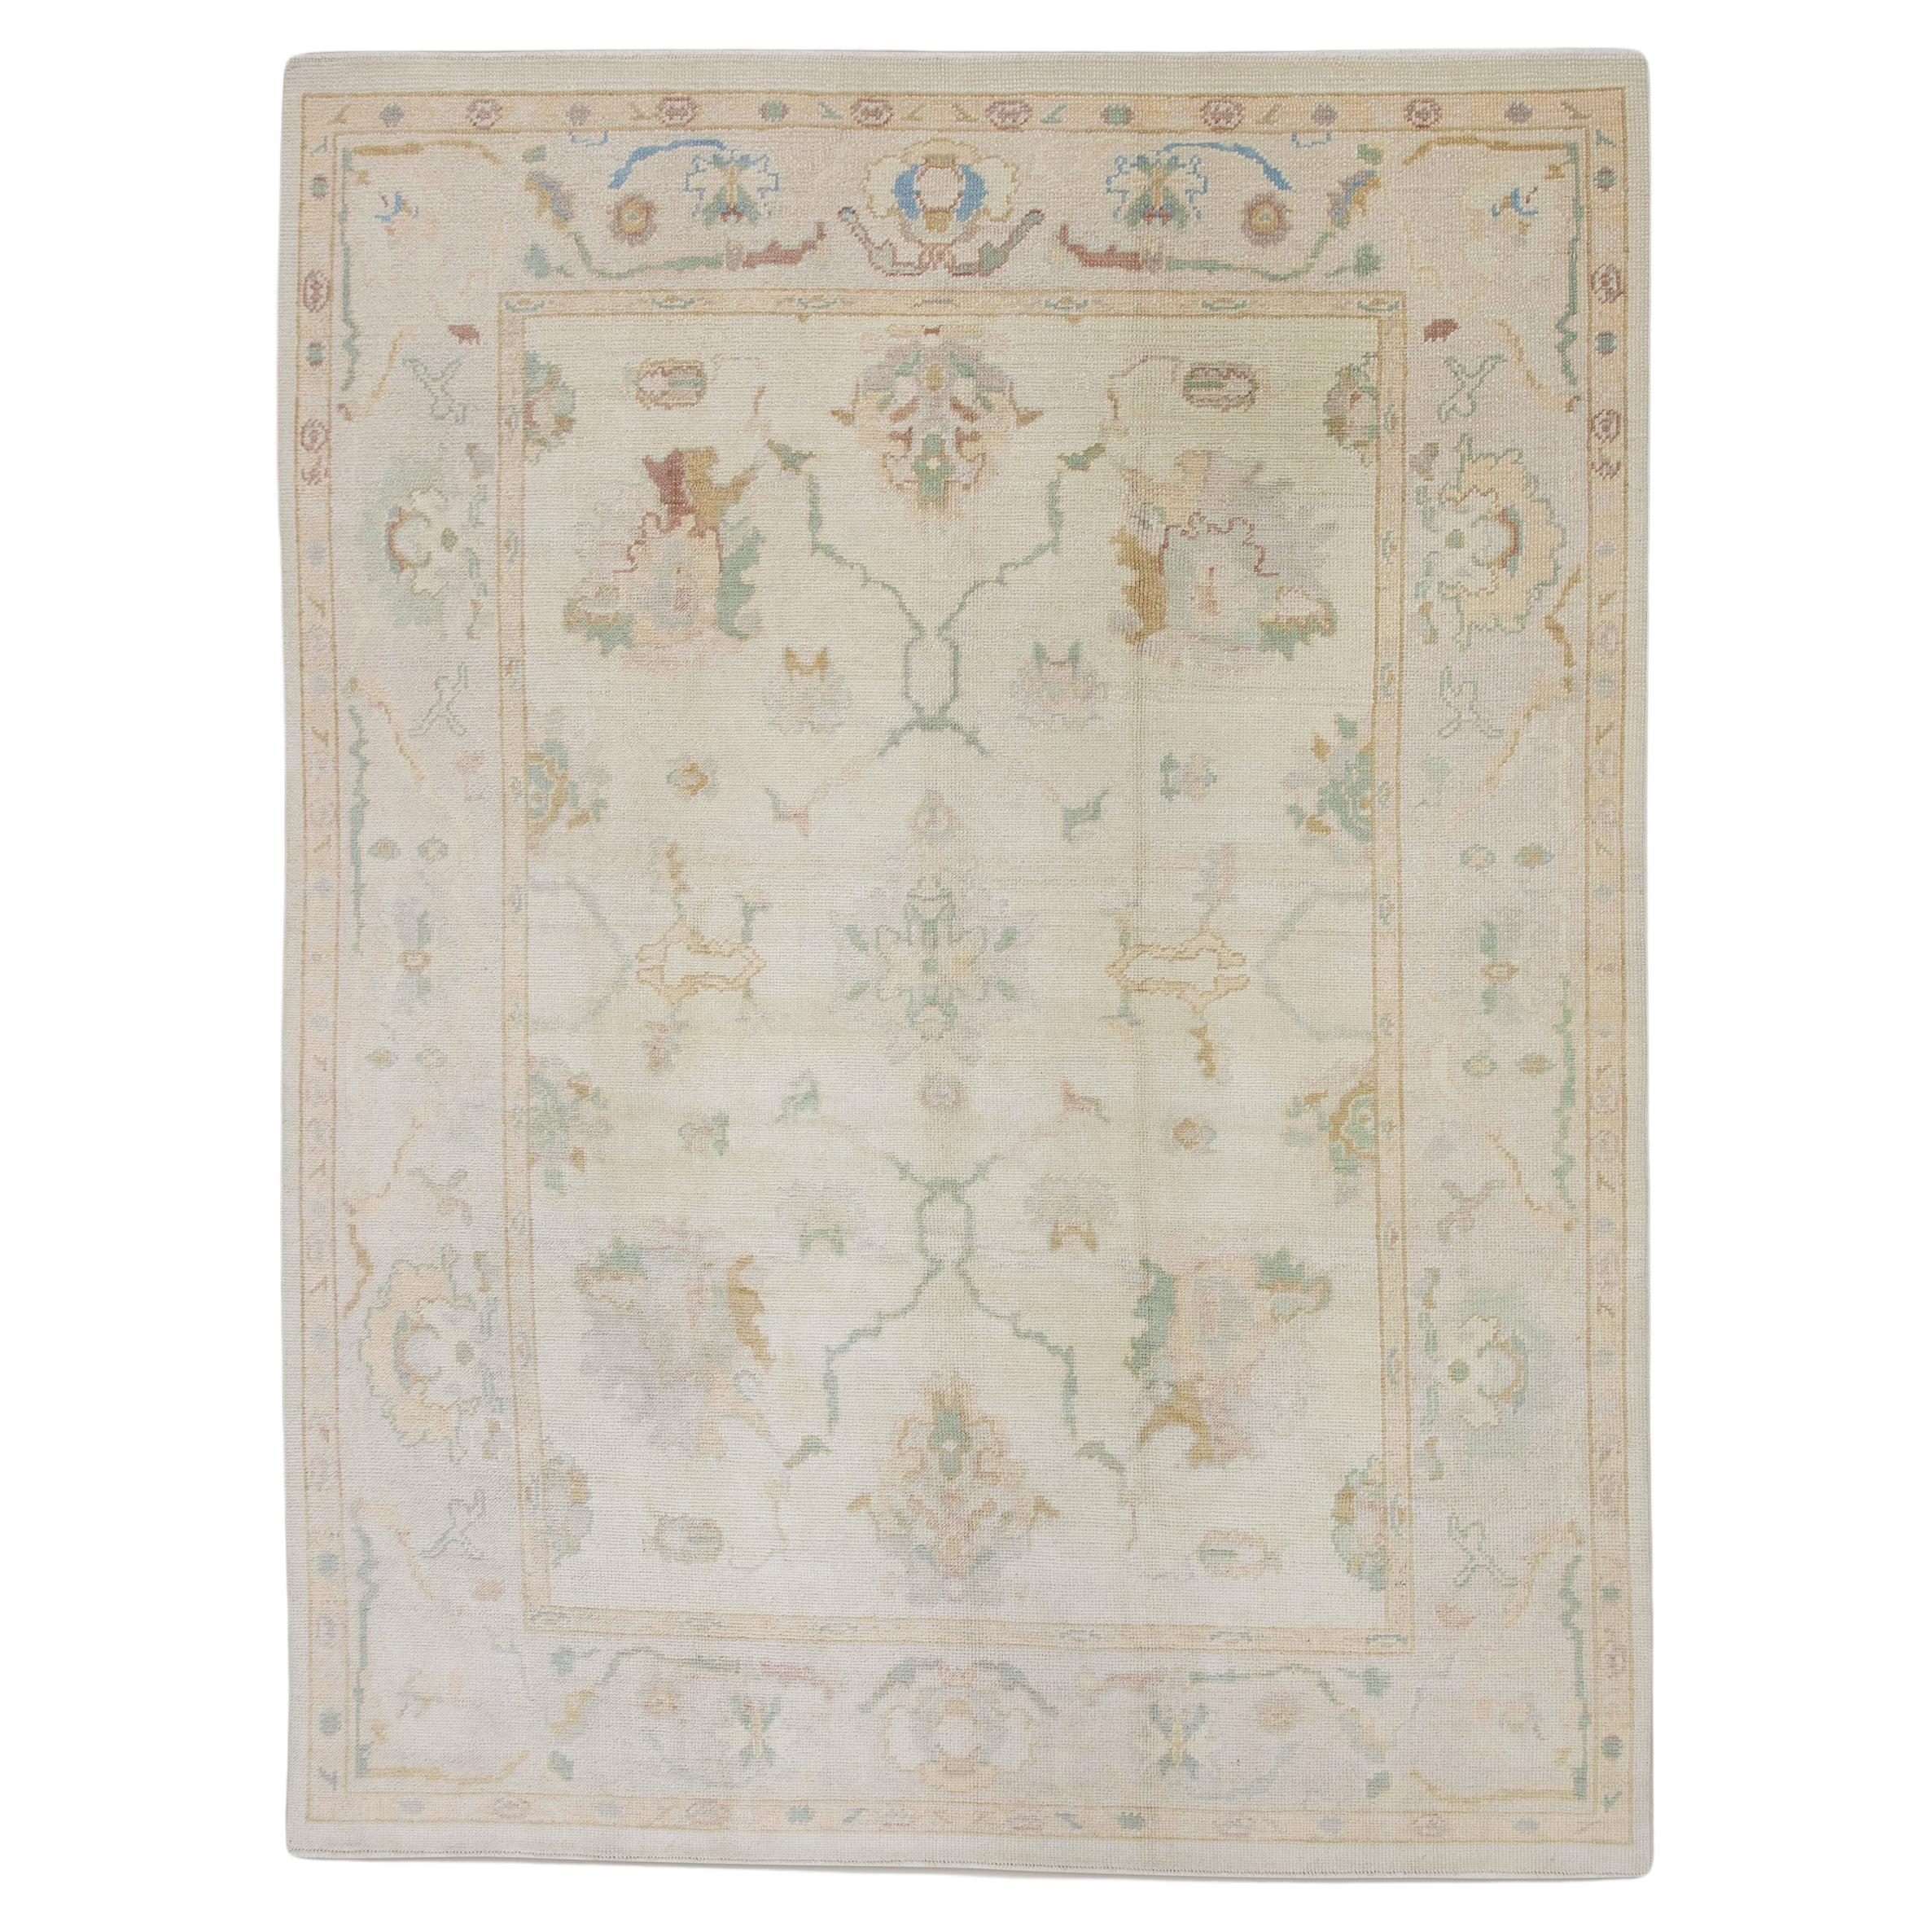 Handwoven Wool Floral Turkish Oushak Rug in Soft Pink, Green, Blue 6'10" x 9'1" For Sale